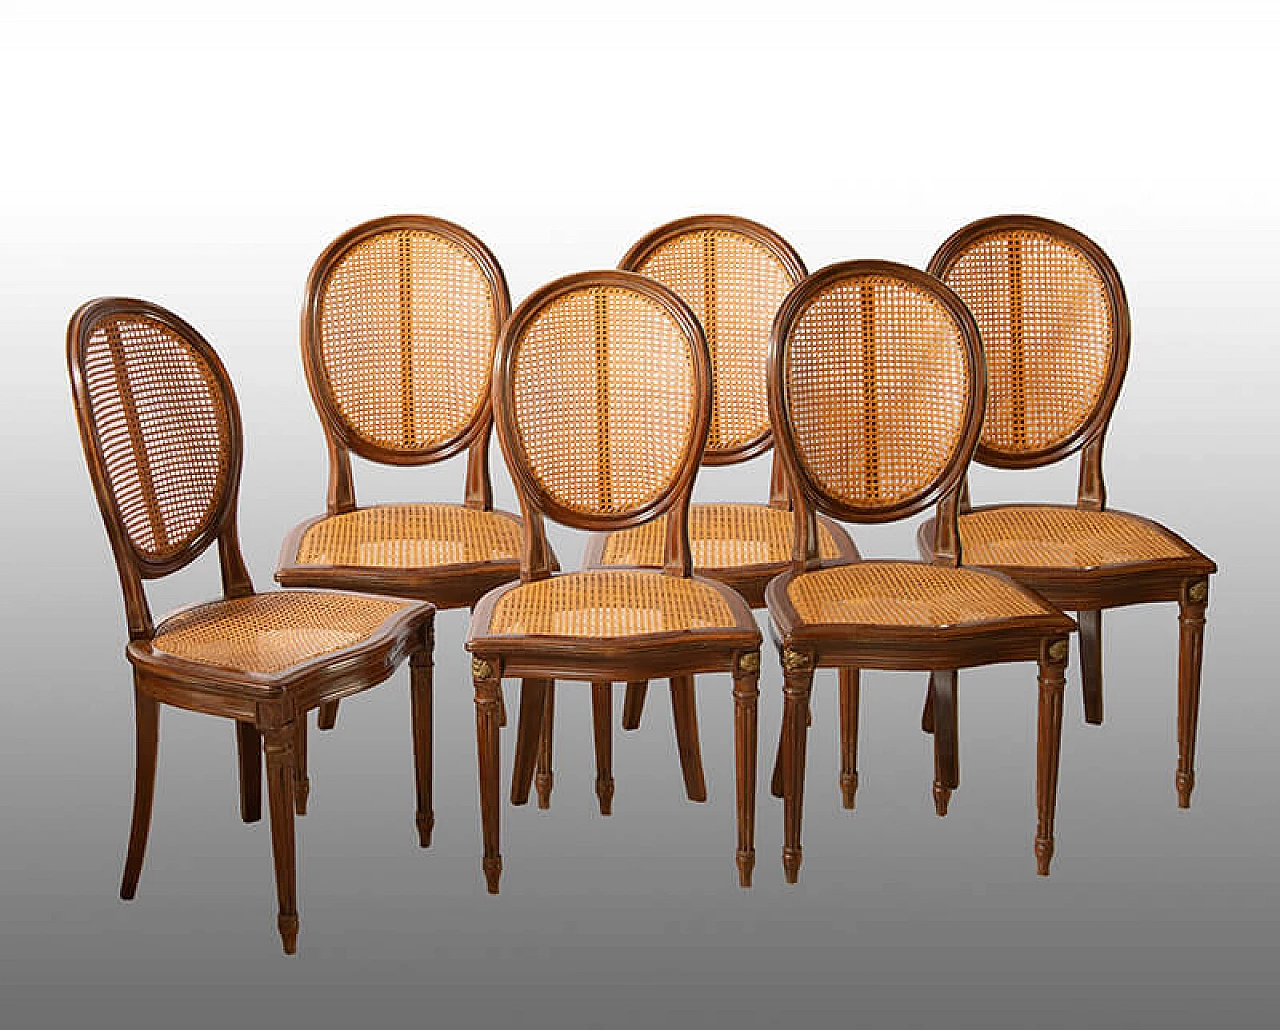 6 Louis XVI style chairs in solid mahogany and Vienna straw, late 19th century 1